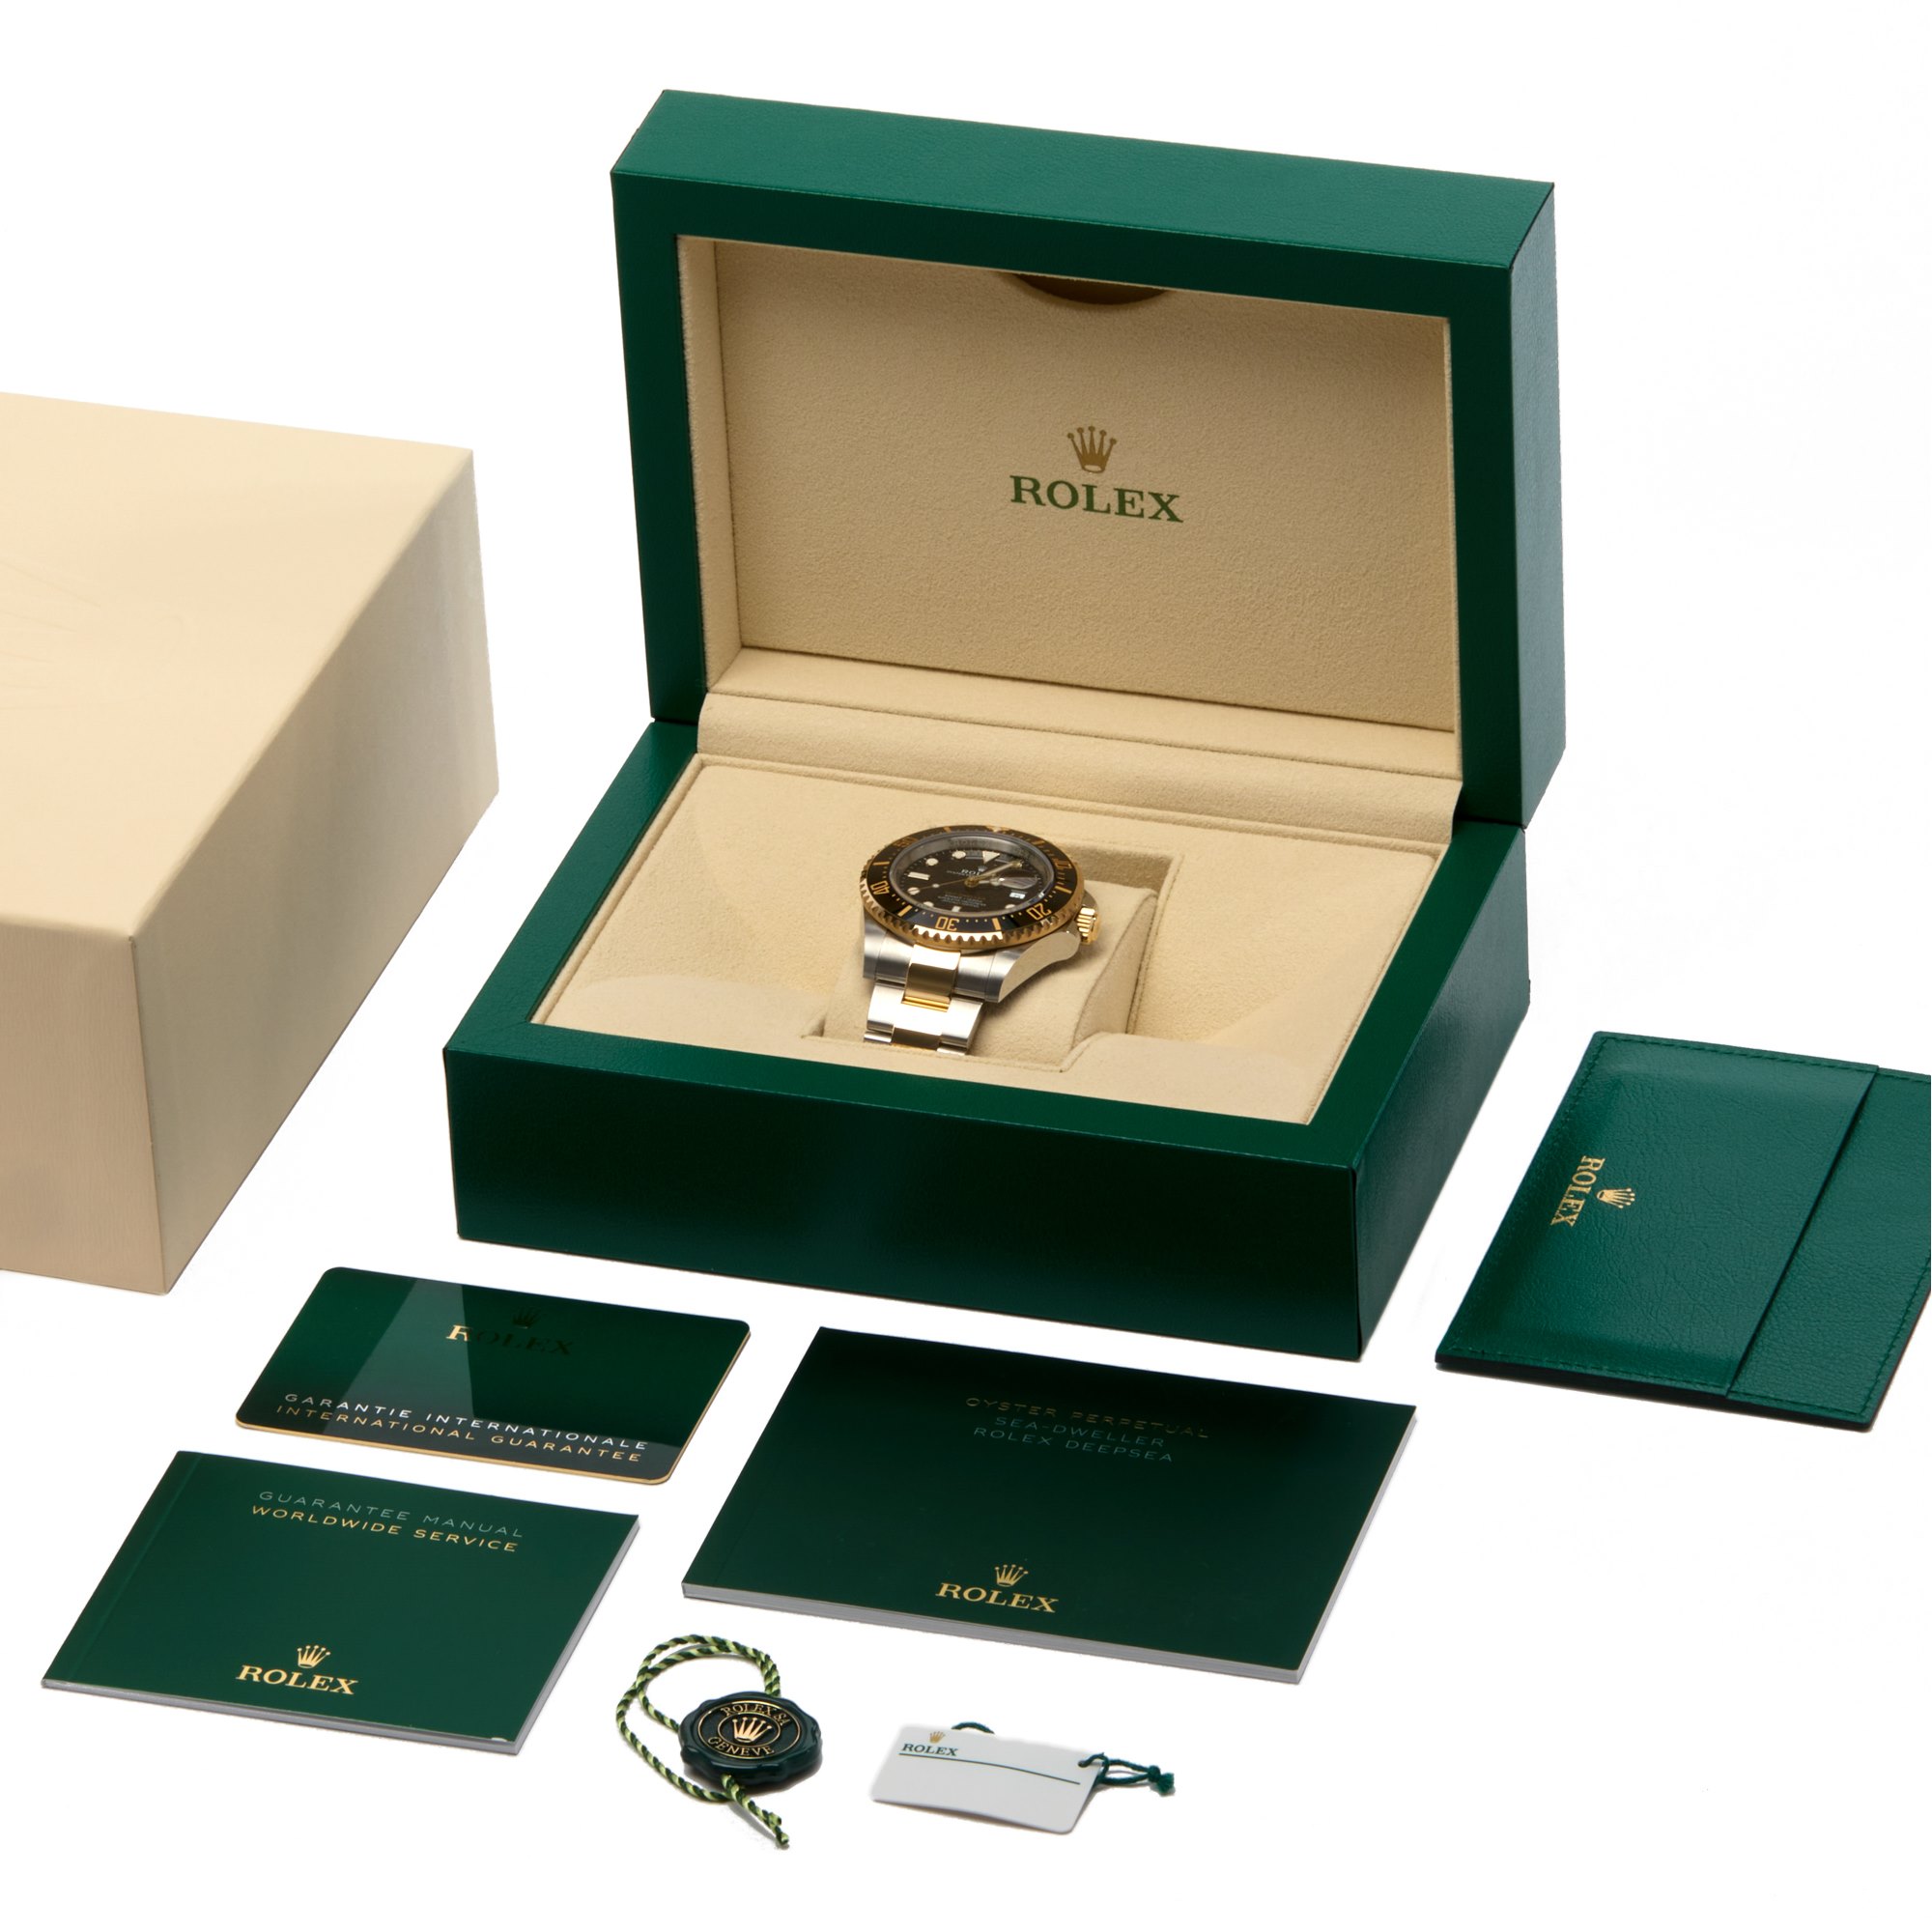 Rolex Sea-Dweller Yellow Gold & Stainless Steel 126603